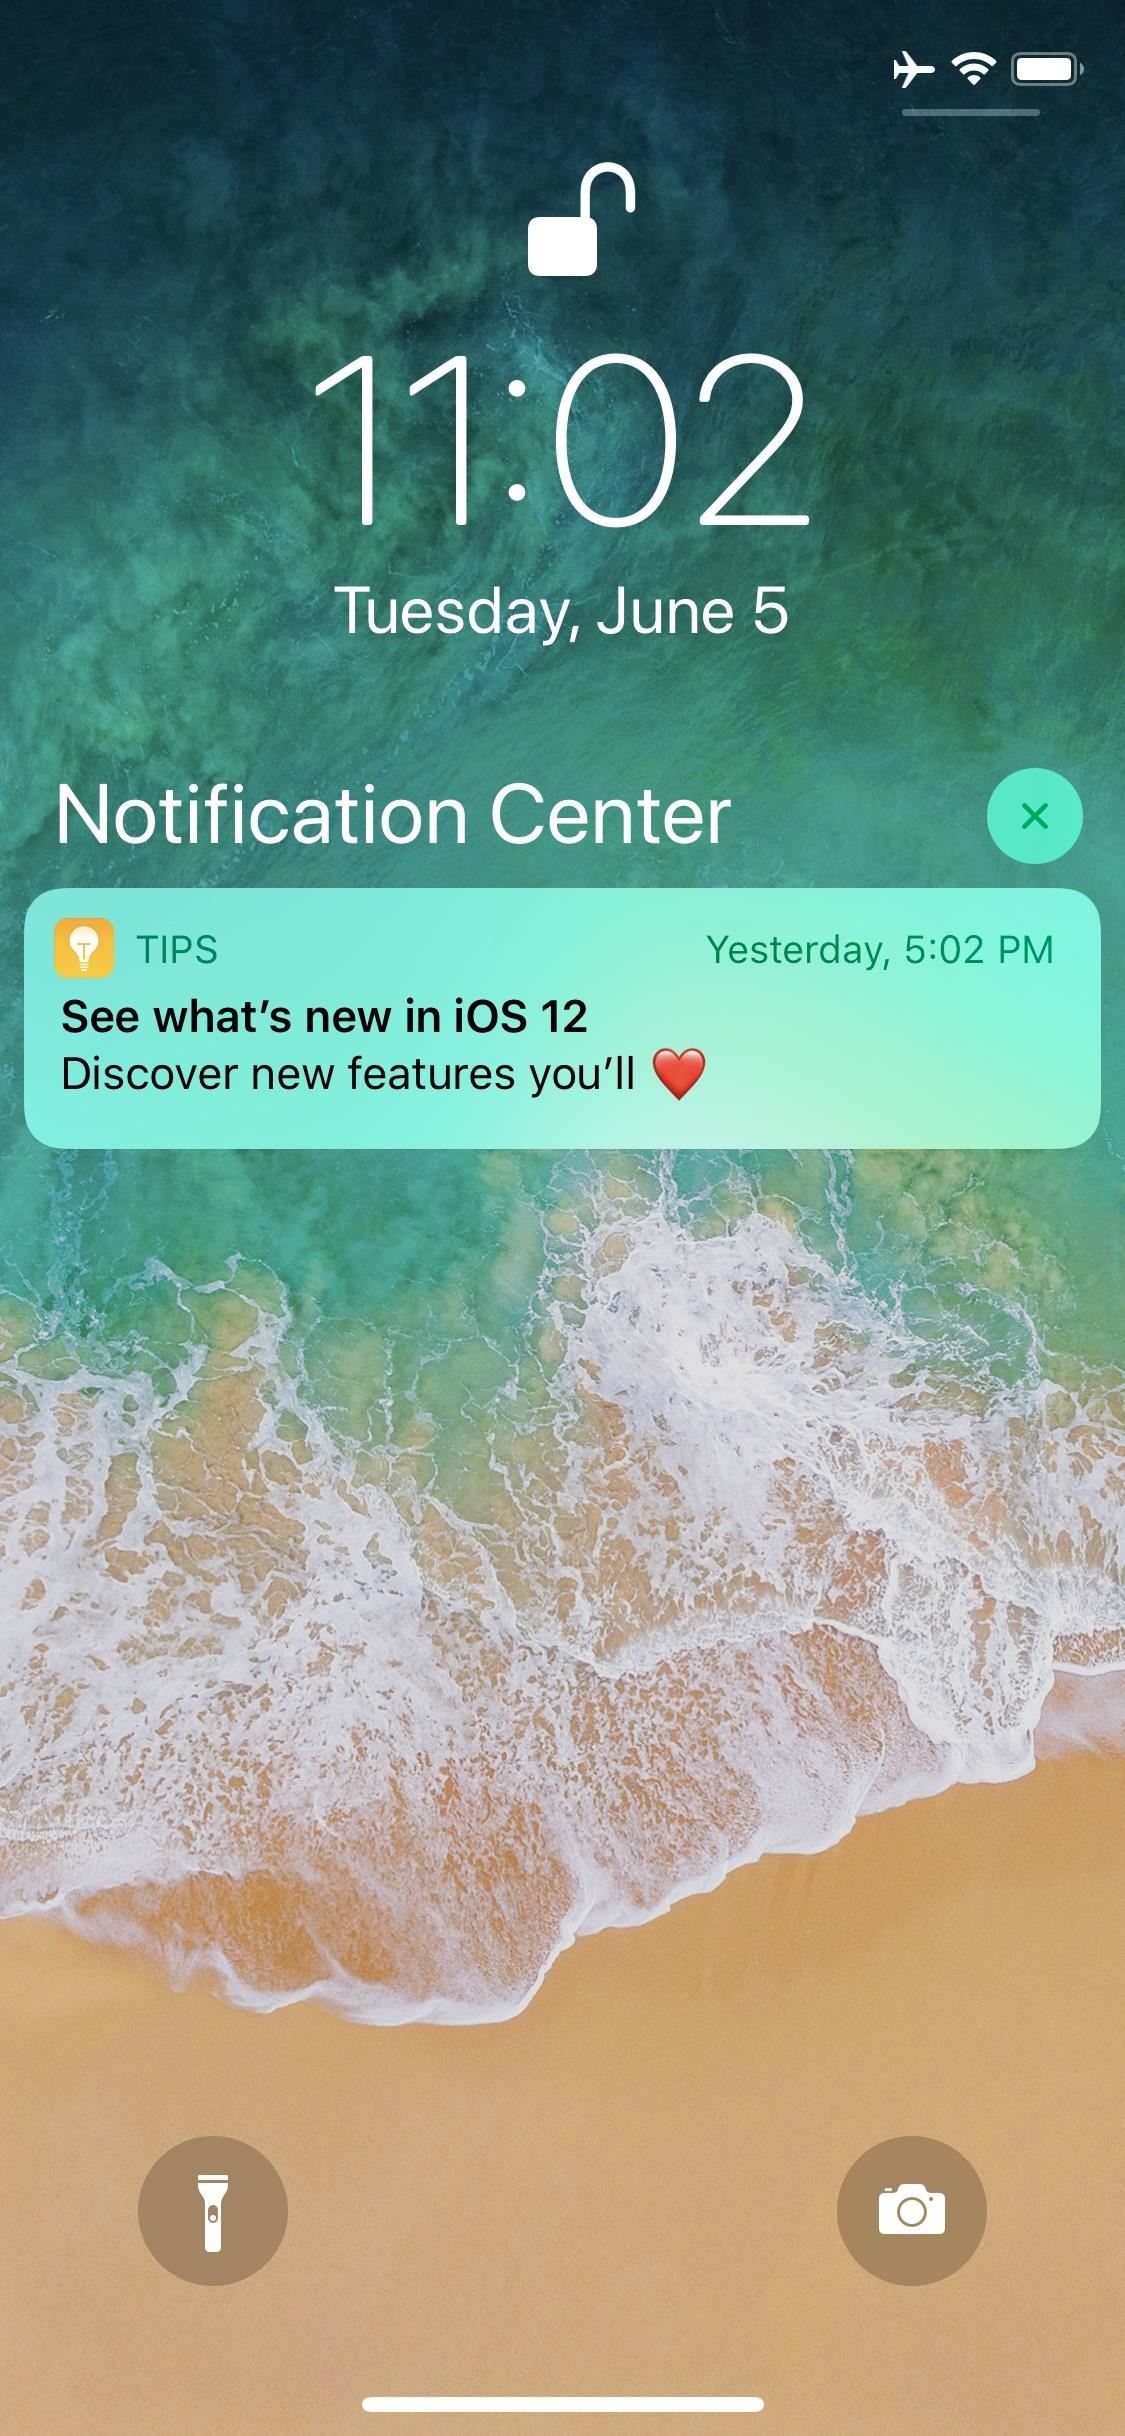 Instant Tuning: How to Quickly Change Notifications Settings for Any App in iOS 12